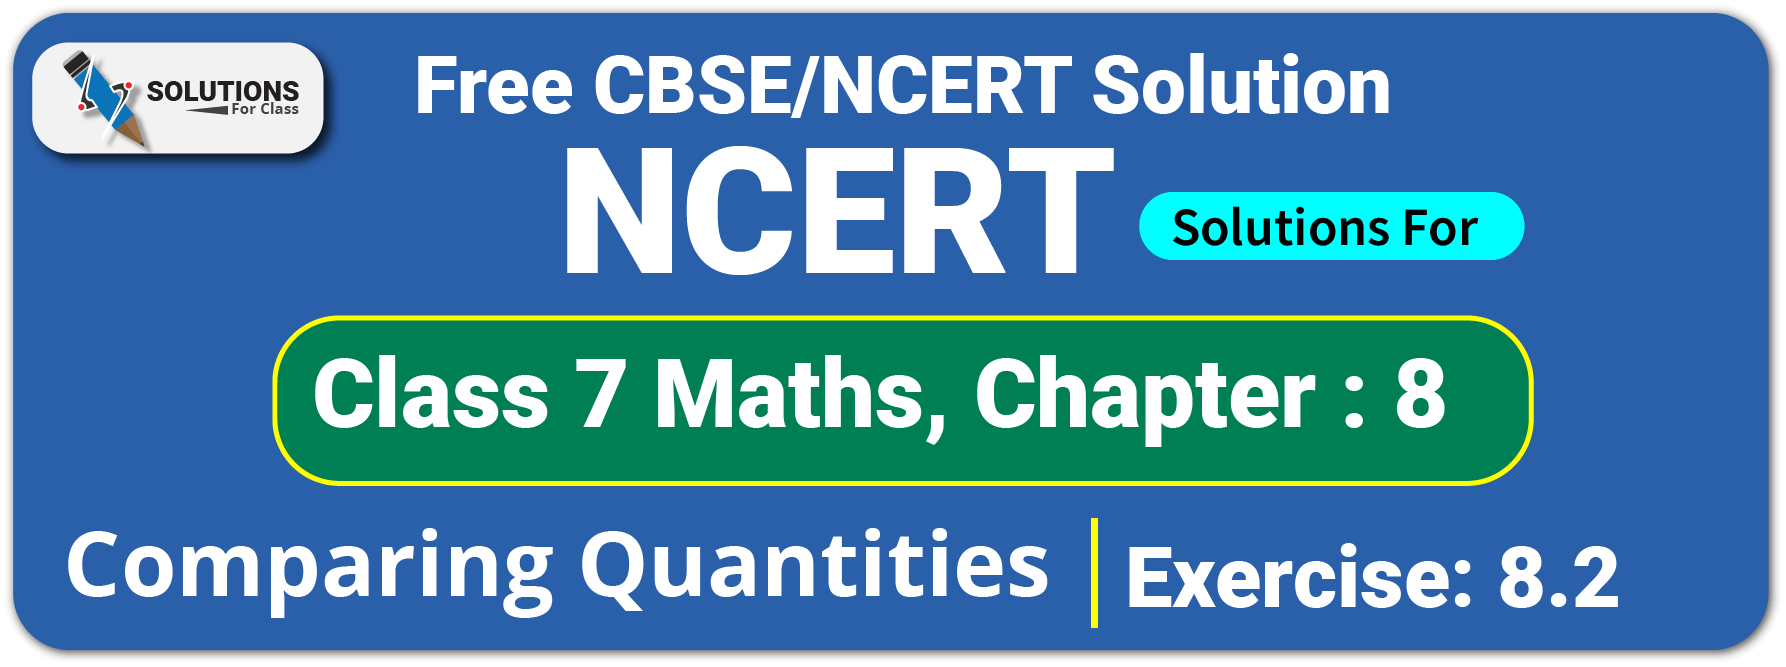 NCERT Solutions For Class 7 Maths Chapter 8, Comparing Quantities, Exercise 8.2